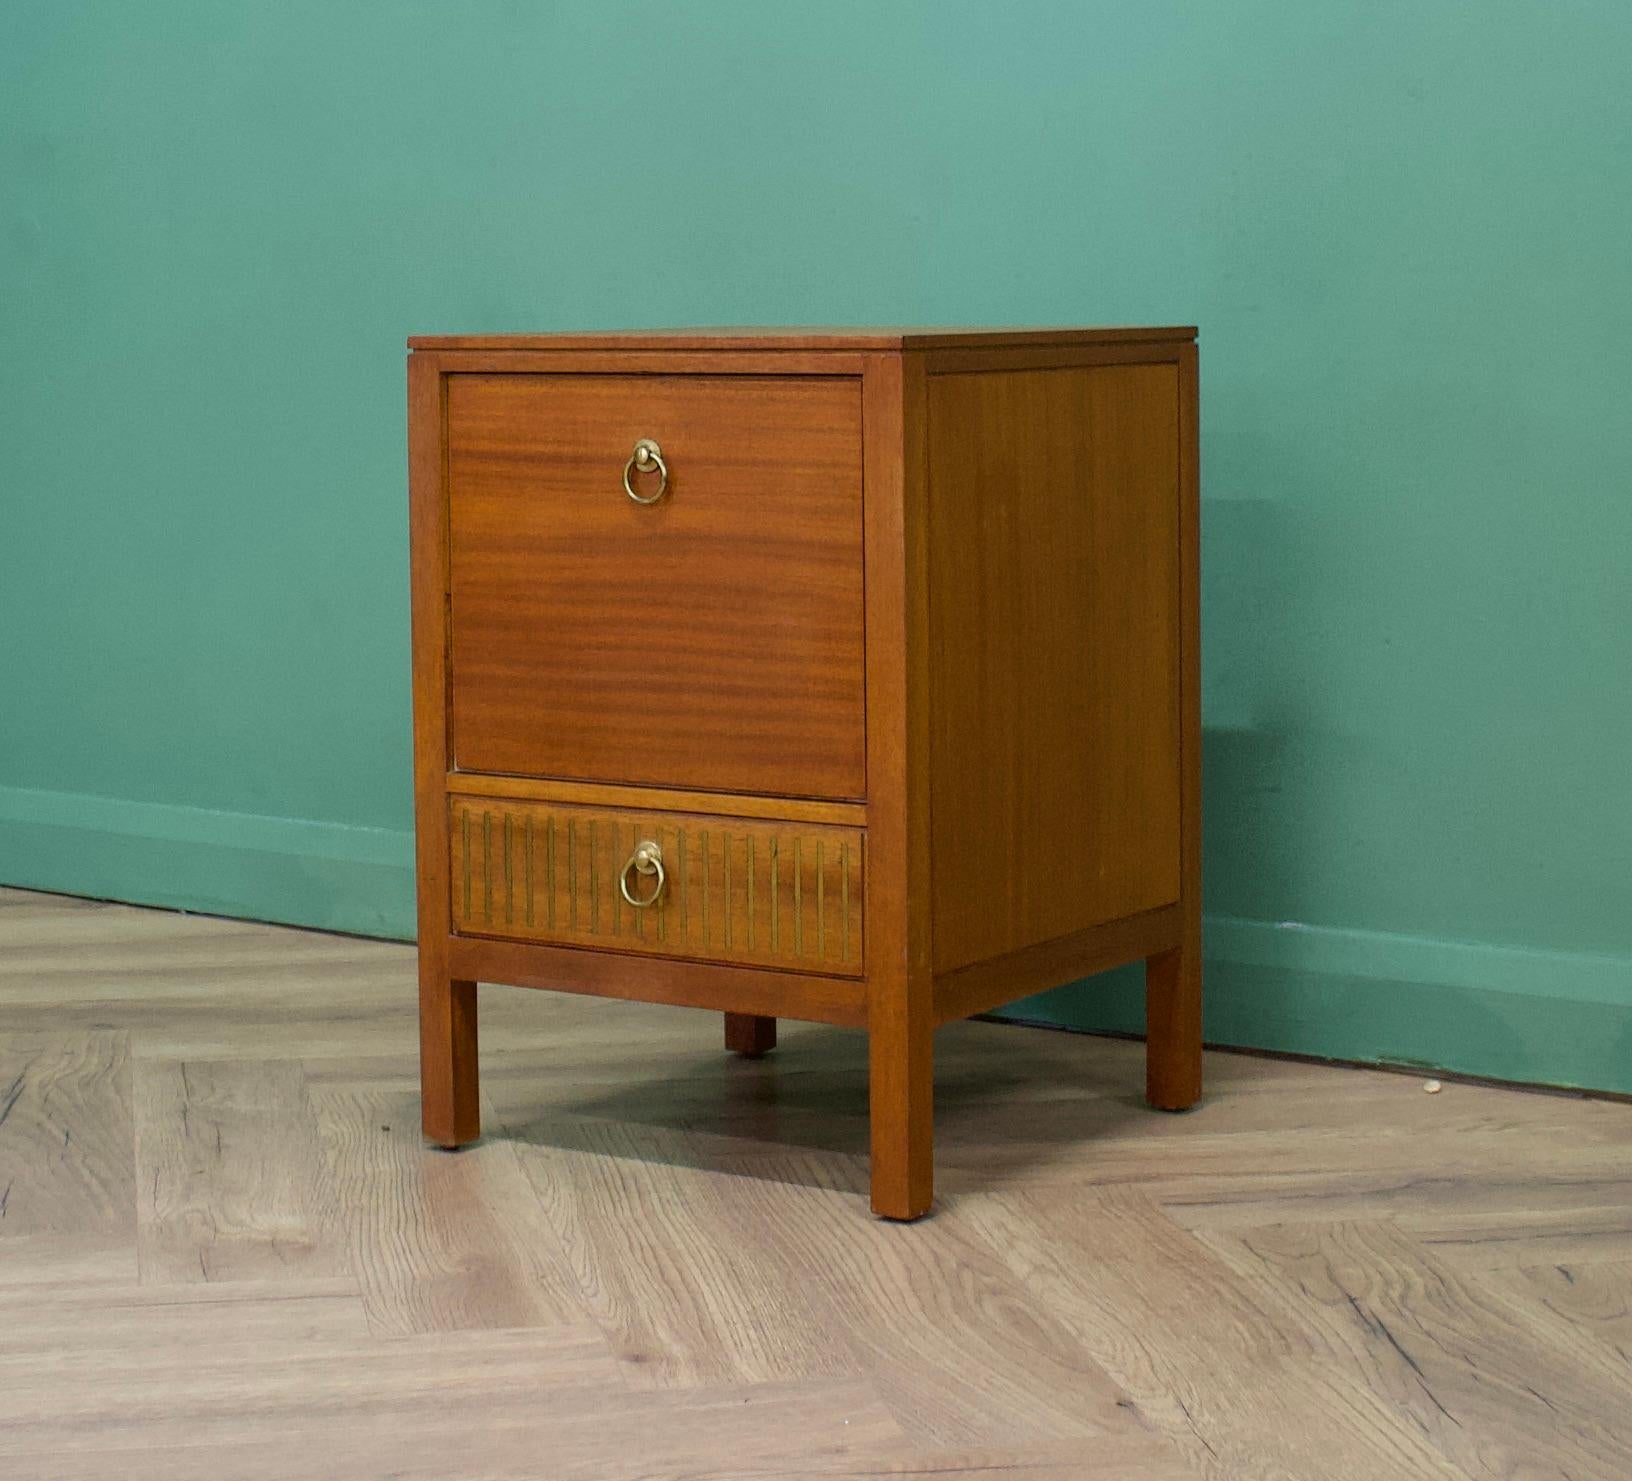 British Mid-Century Teak Bedside Tables from Loughborough, 1950s